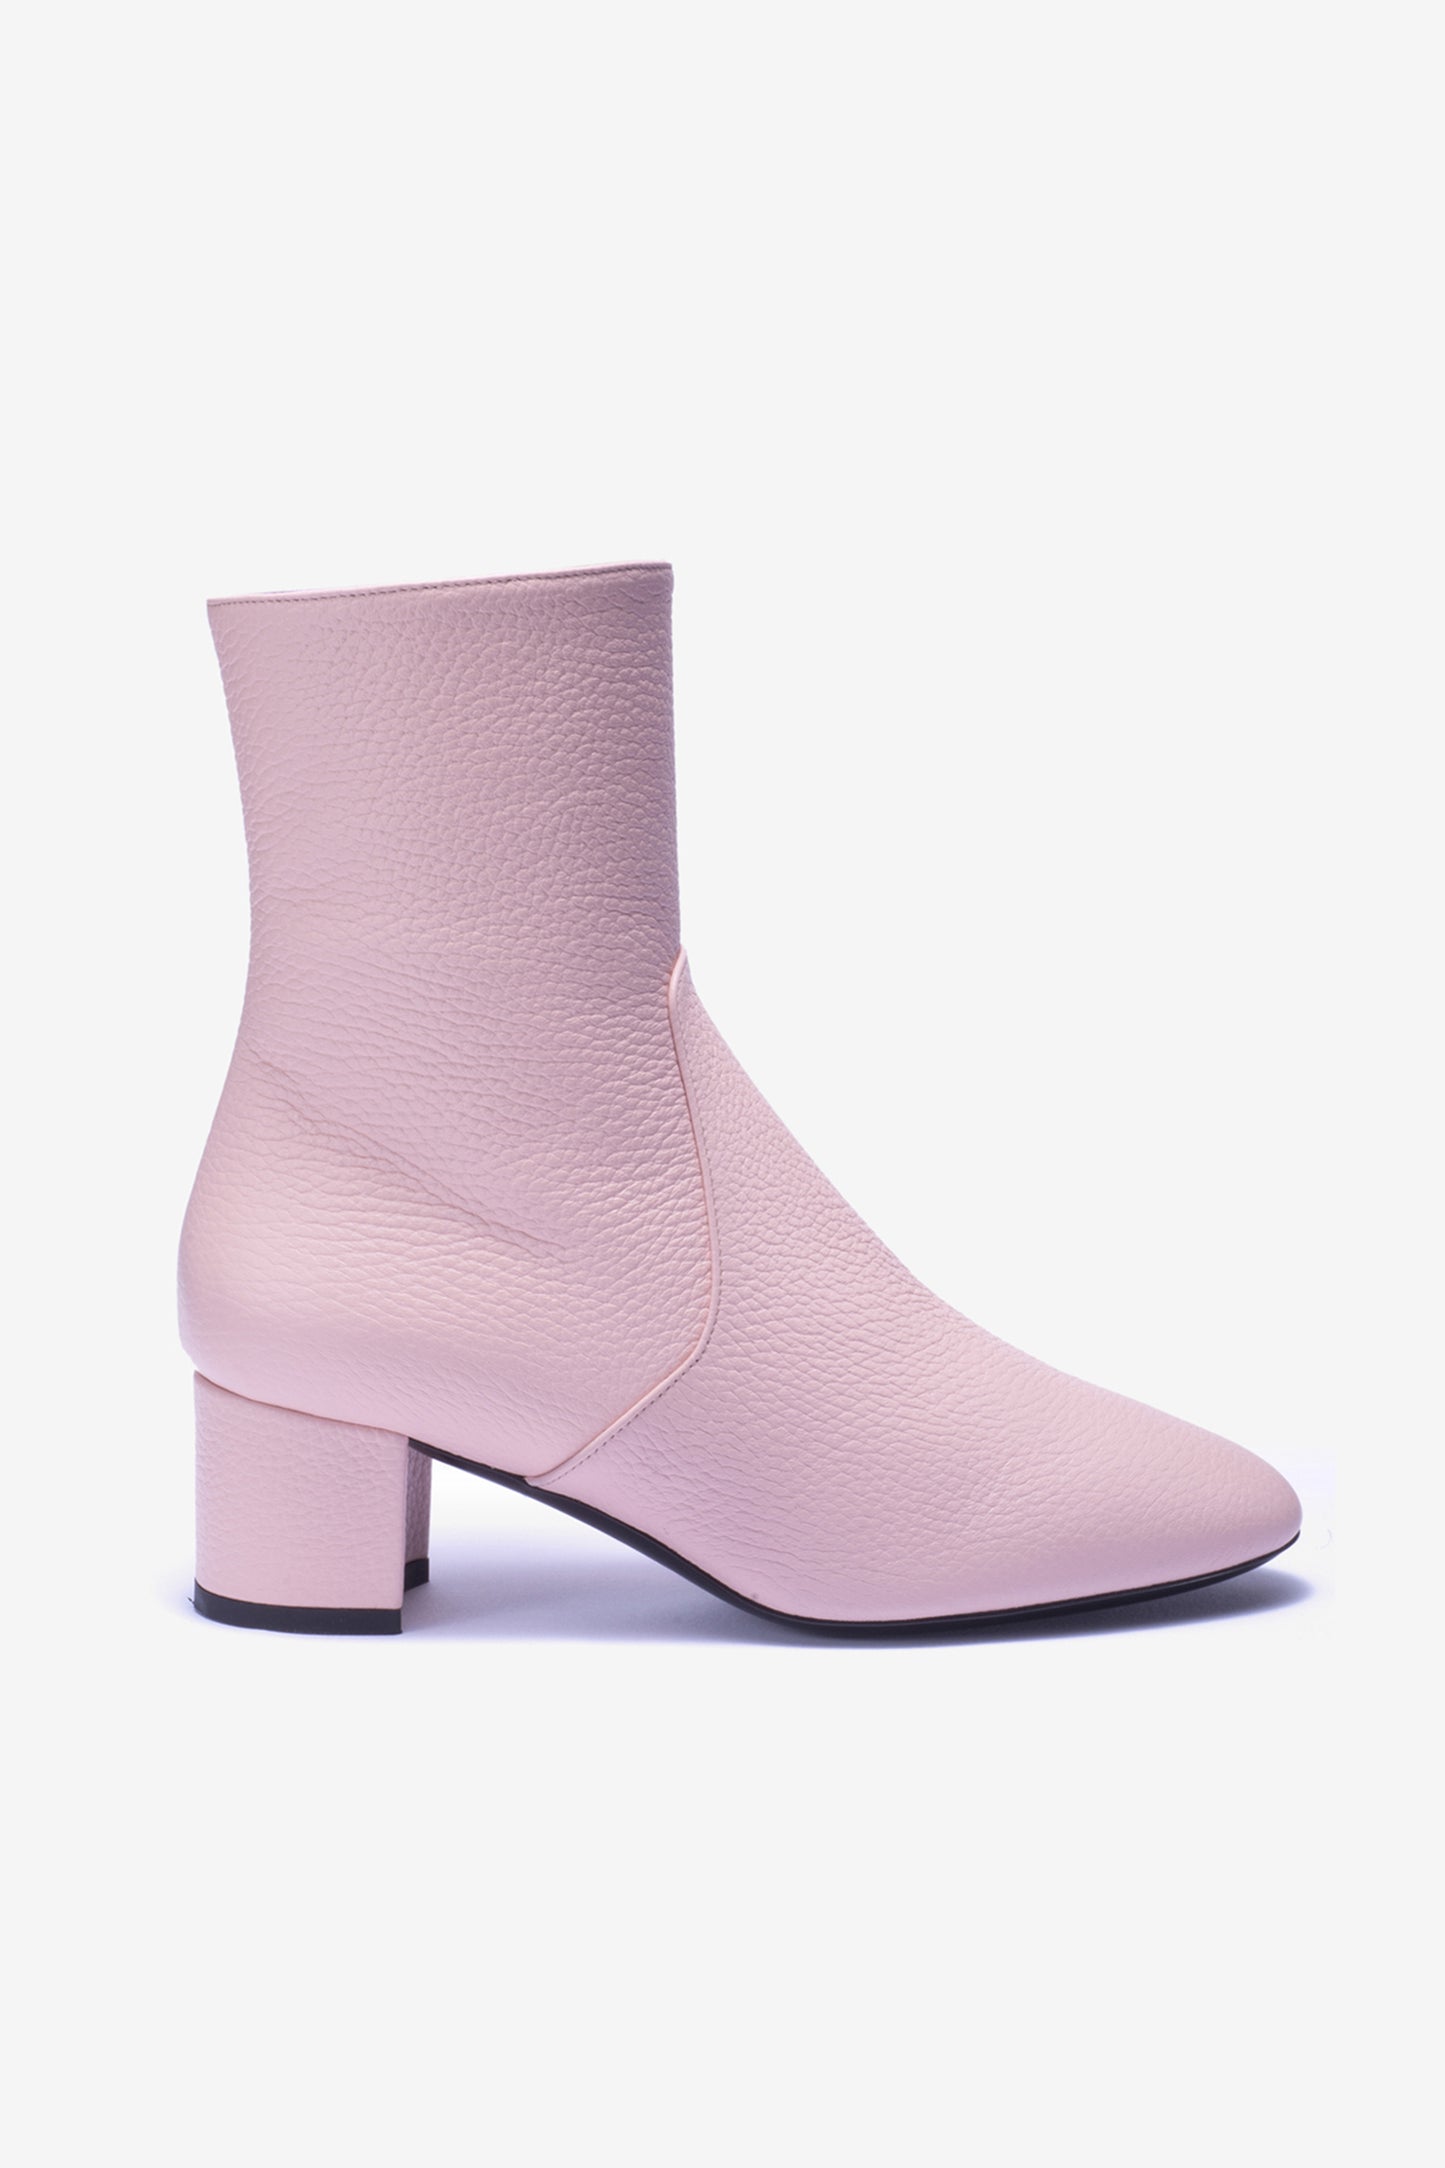 LORE - Powder ankle boot